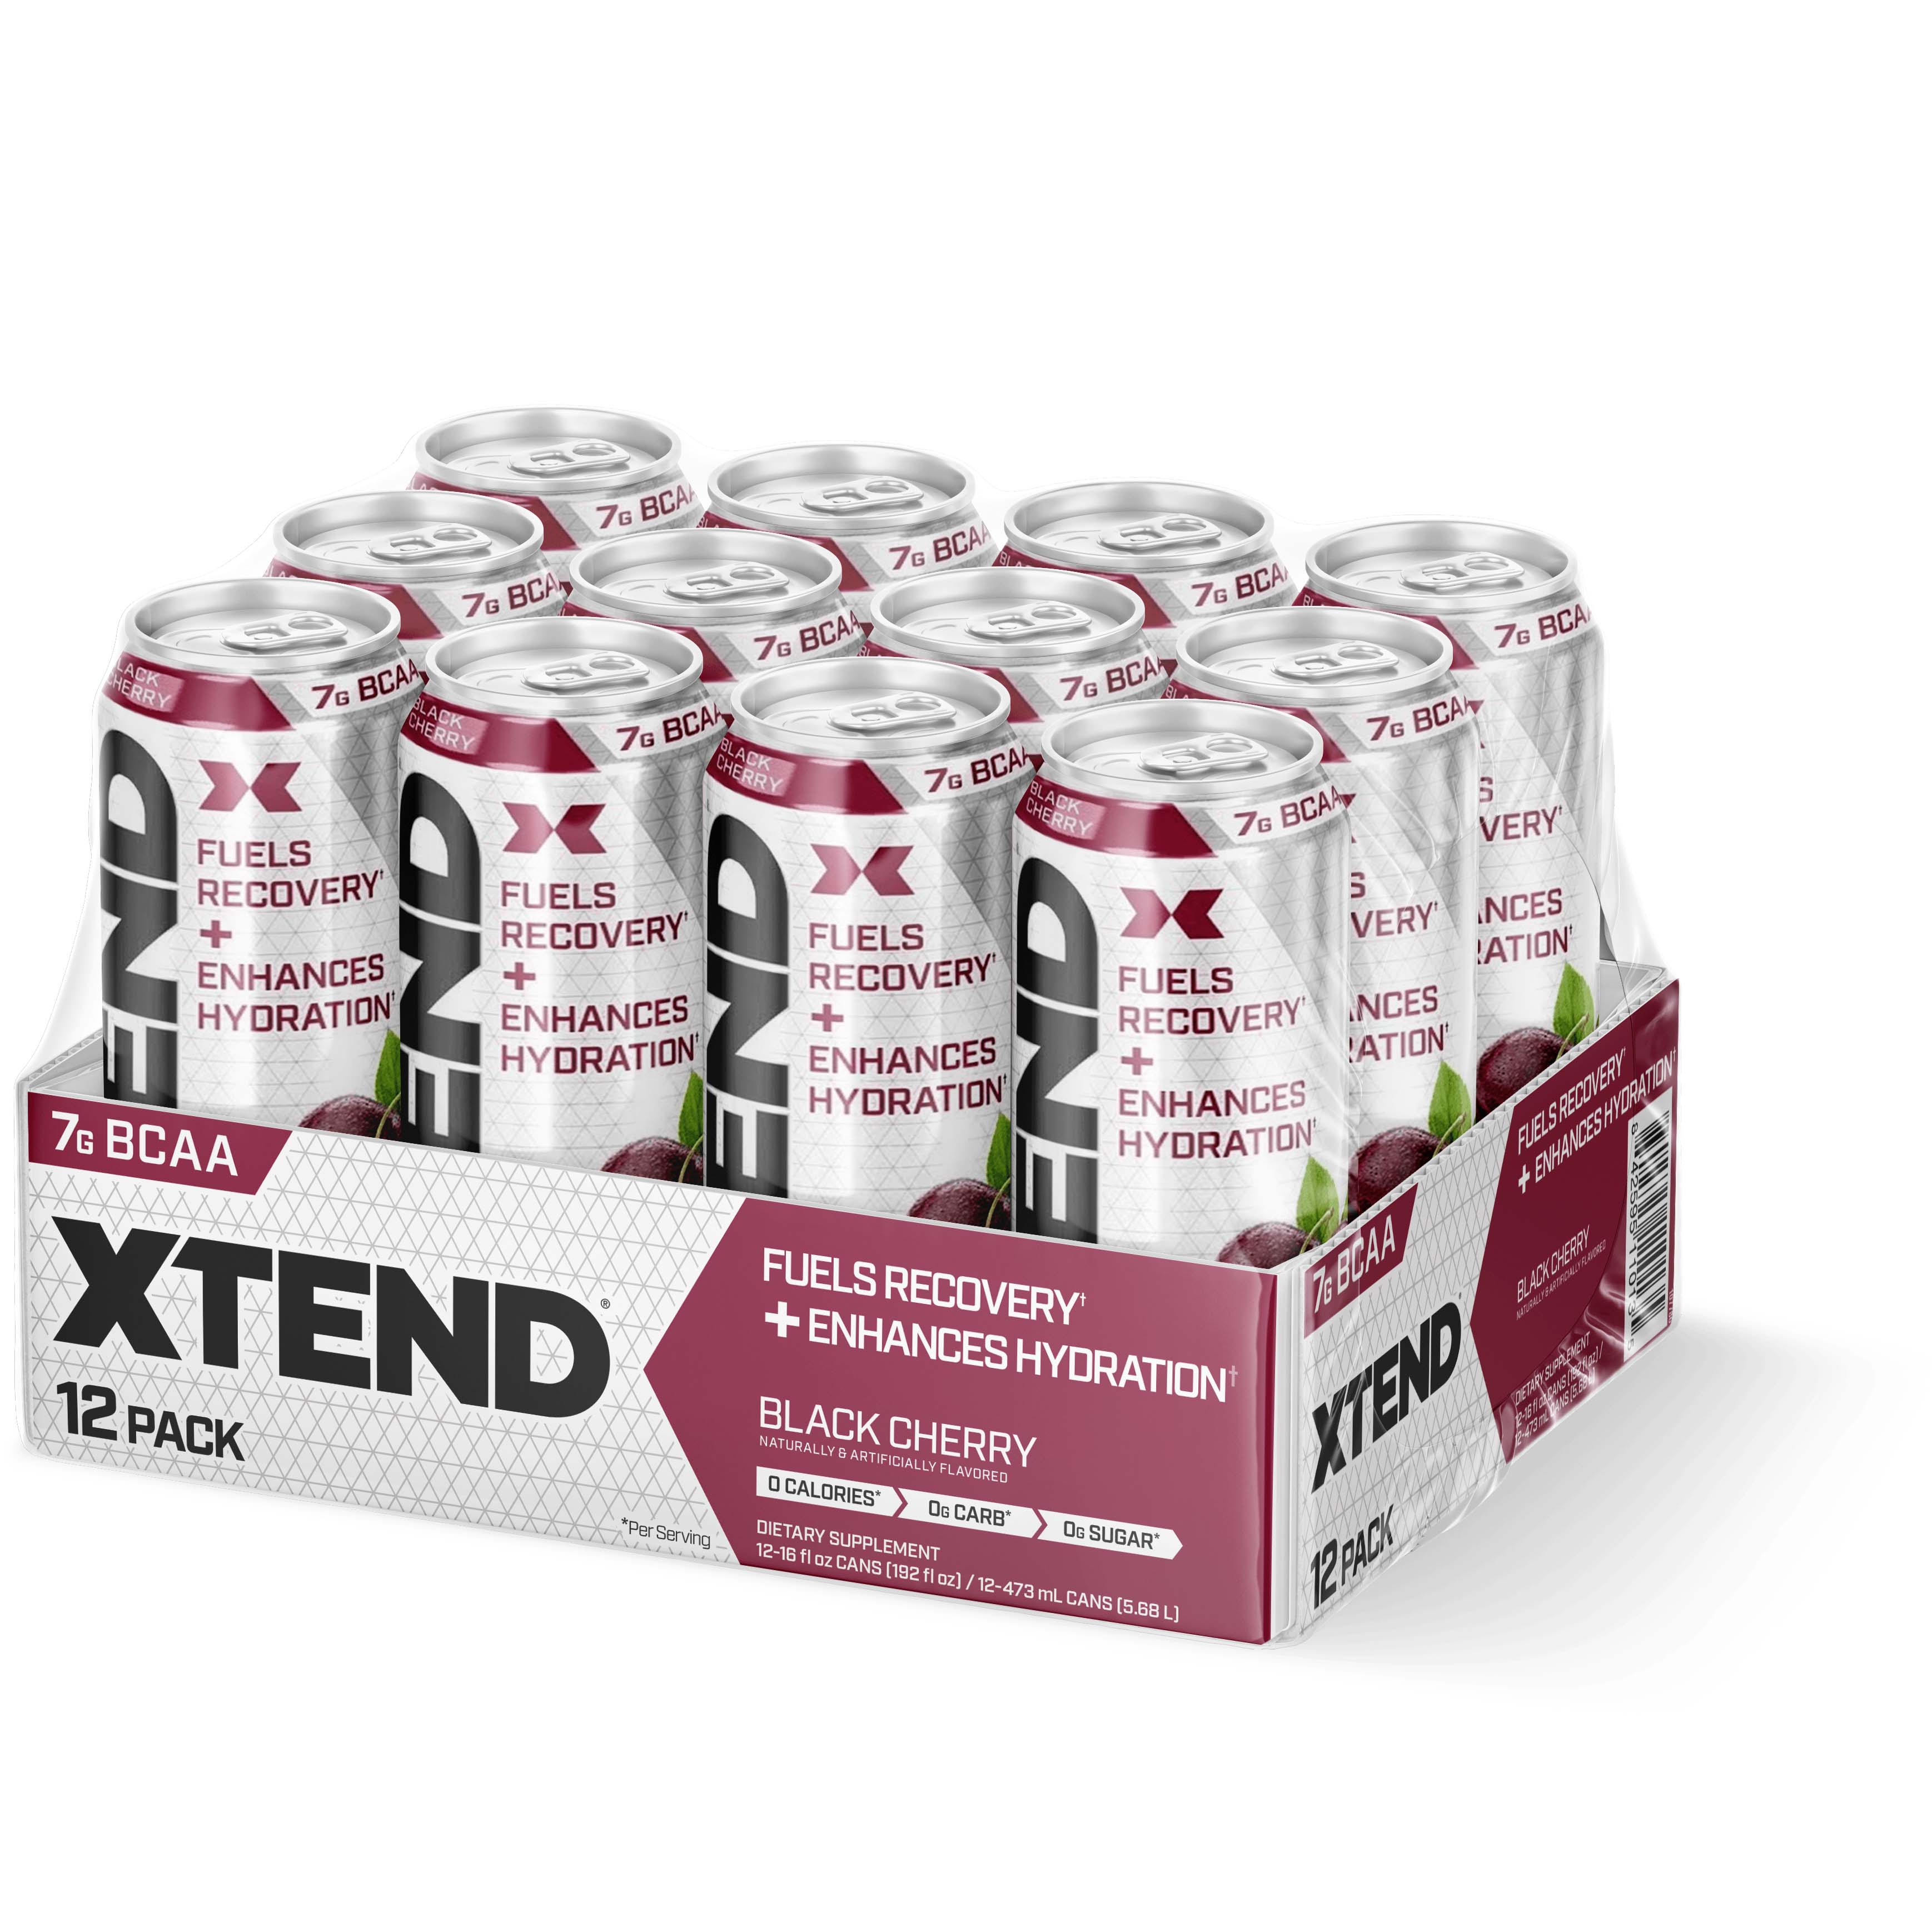 Xtend Carbonated Zero Sugar Hydration & Recovery Drink, Black Cherry, Box of 12 Pieces